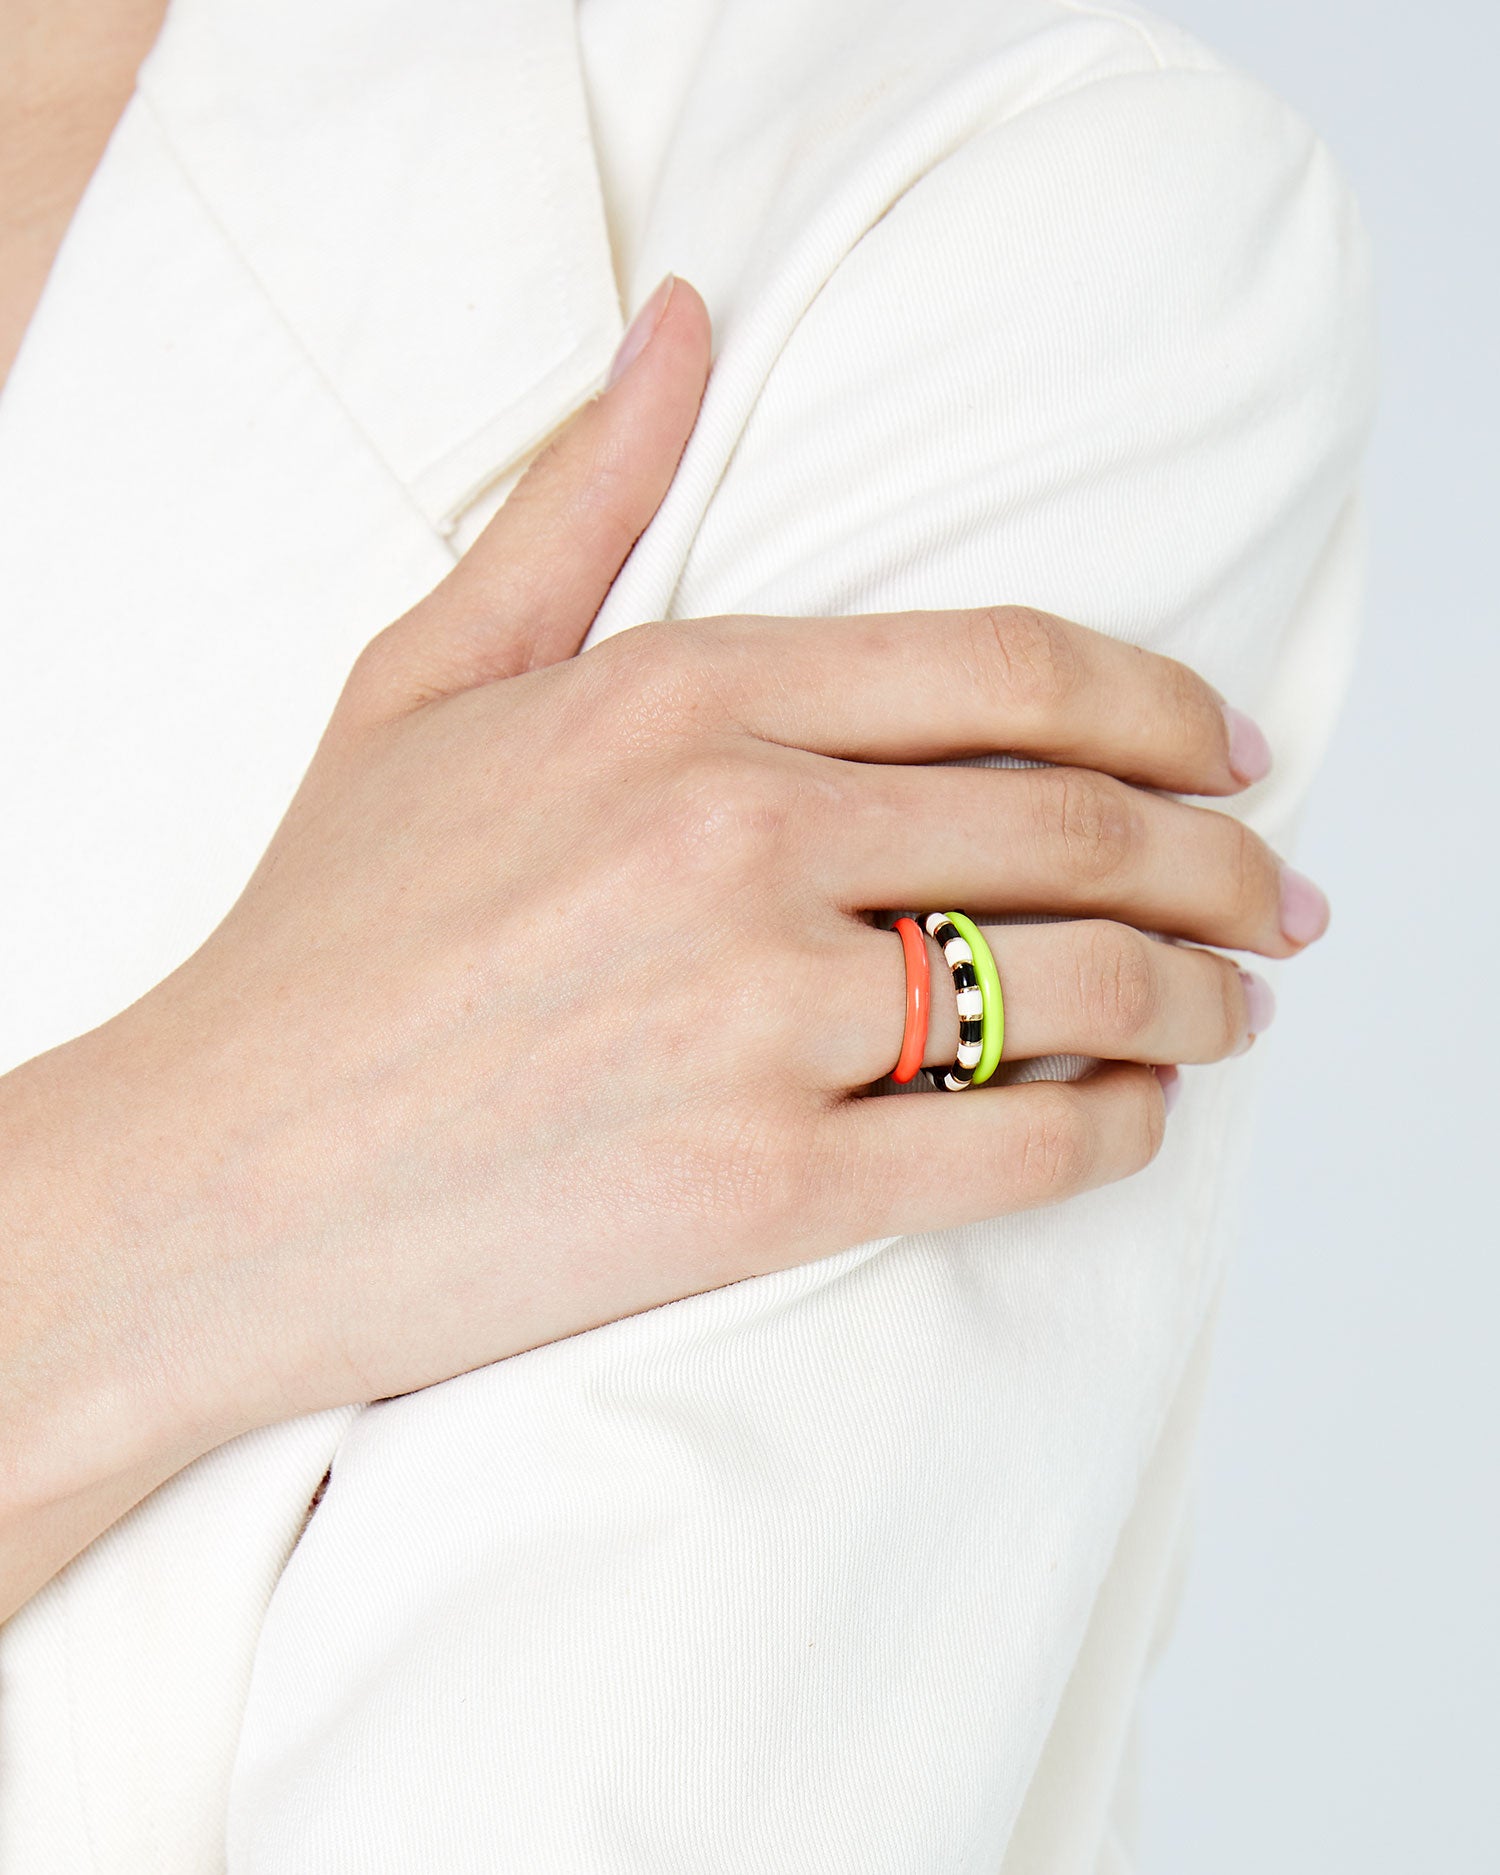 athena wearing the Coral Enamel Stacking Ring with the neon yellow stacking ring and the black and cream stripe stacking ring